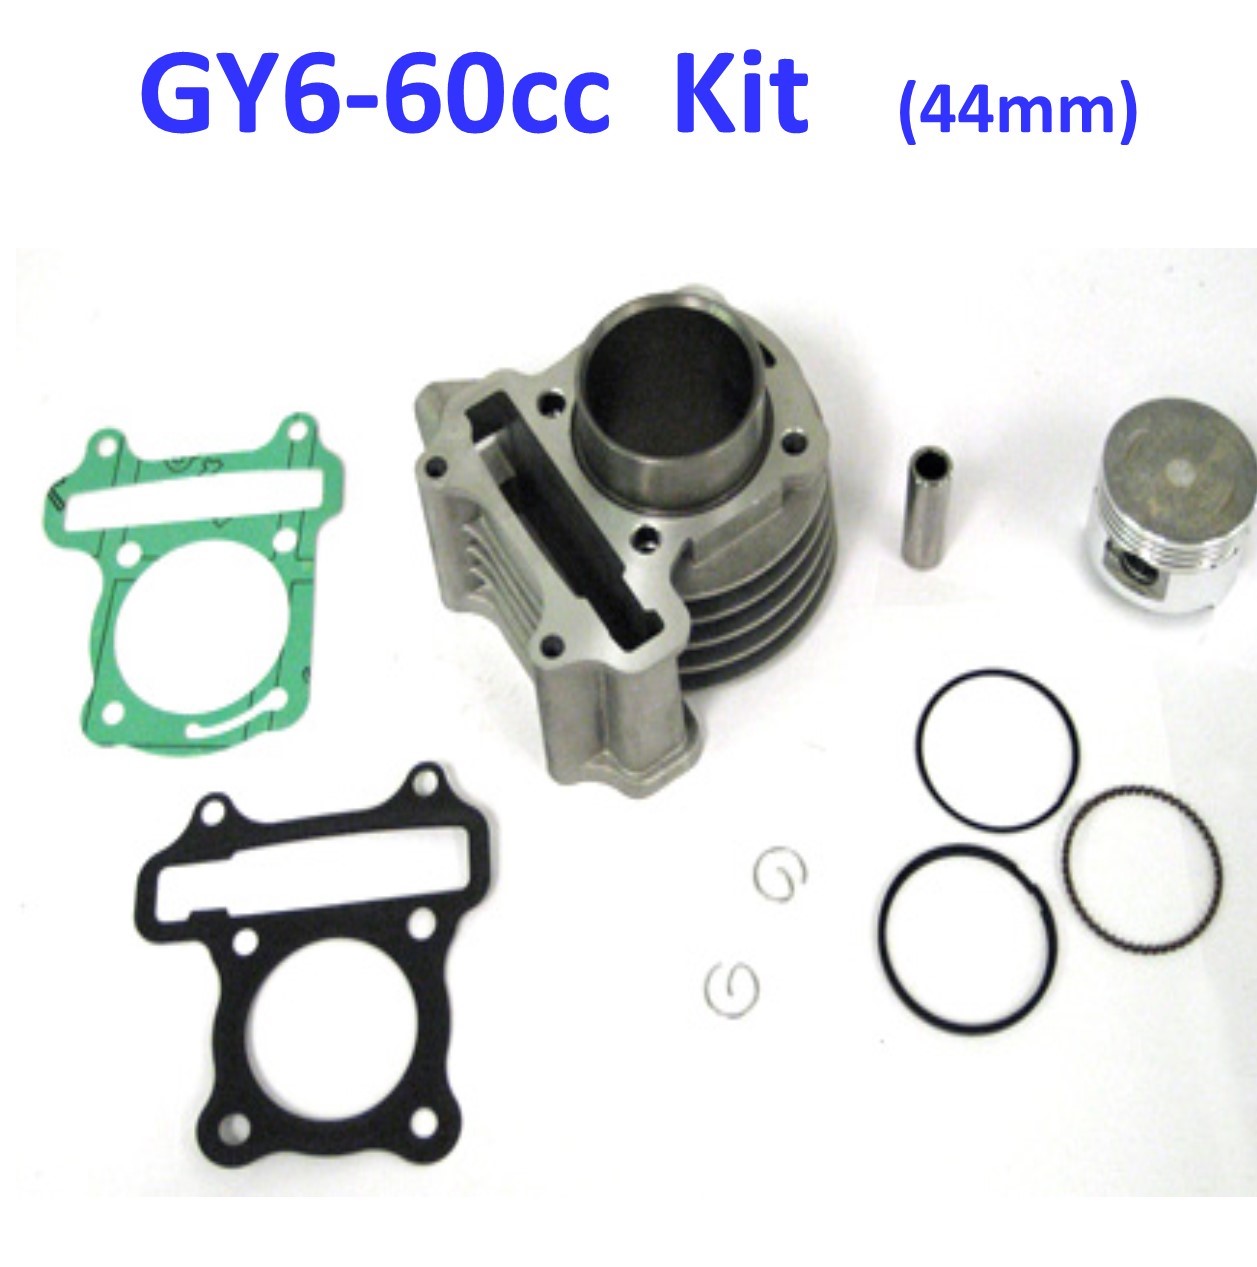 60cc (High Performance) Cylinder Piston Top End Kit For GY6-50 QMB139 Chinese Scooter Motors. Bore=44mm